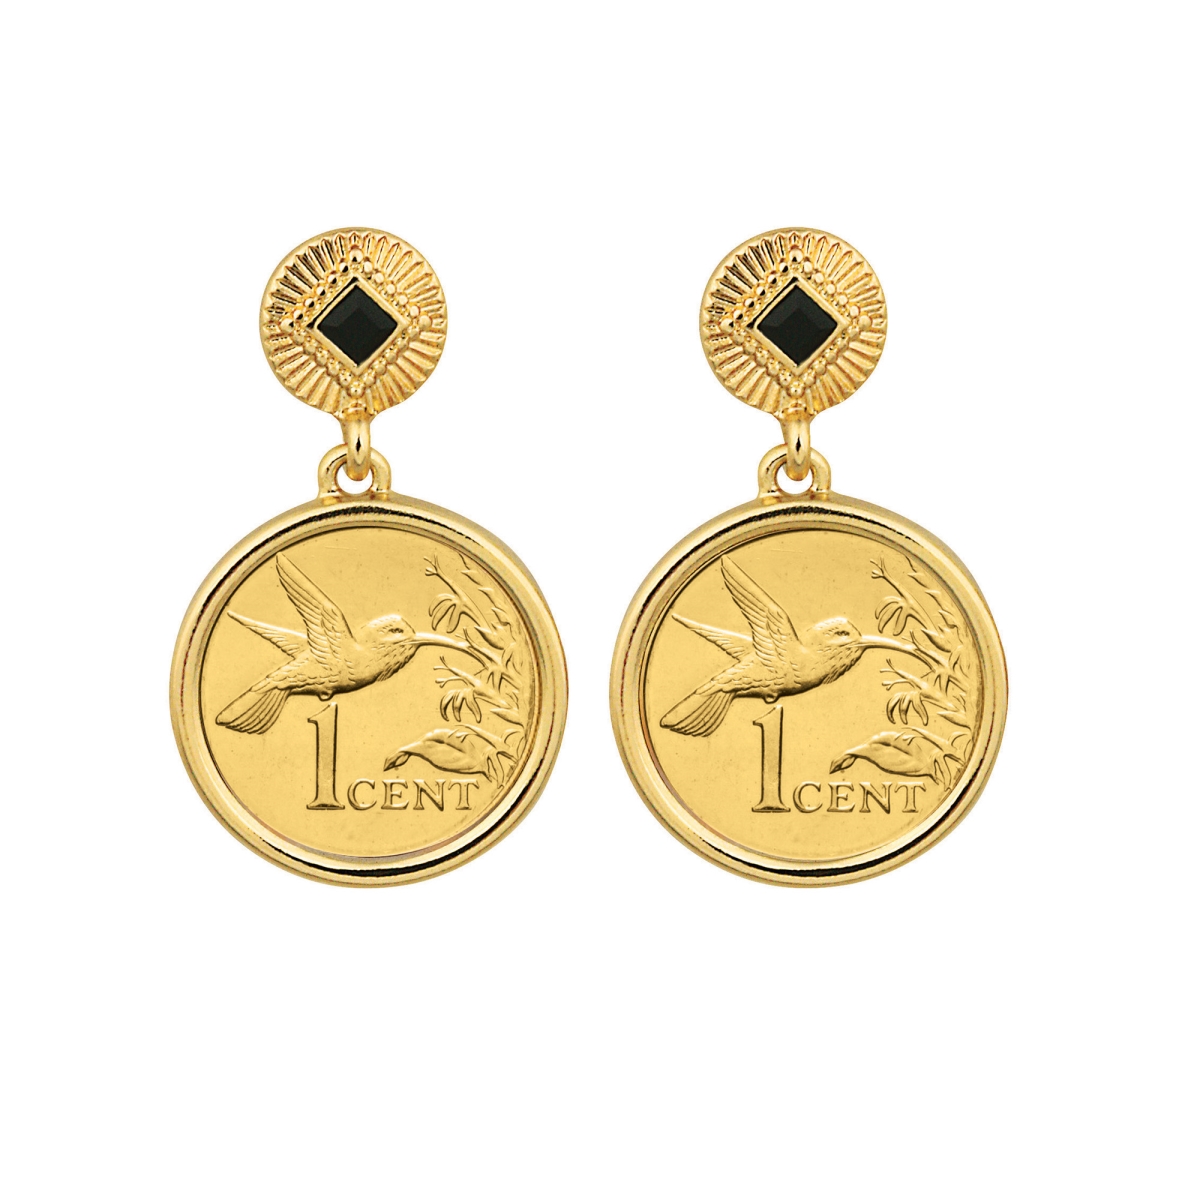 Picture of American Coin Treasures 17092 Gold Layered Hummingbird Coin Goldtone Art Decor Earrings with Black Stone, Gold